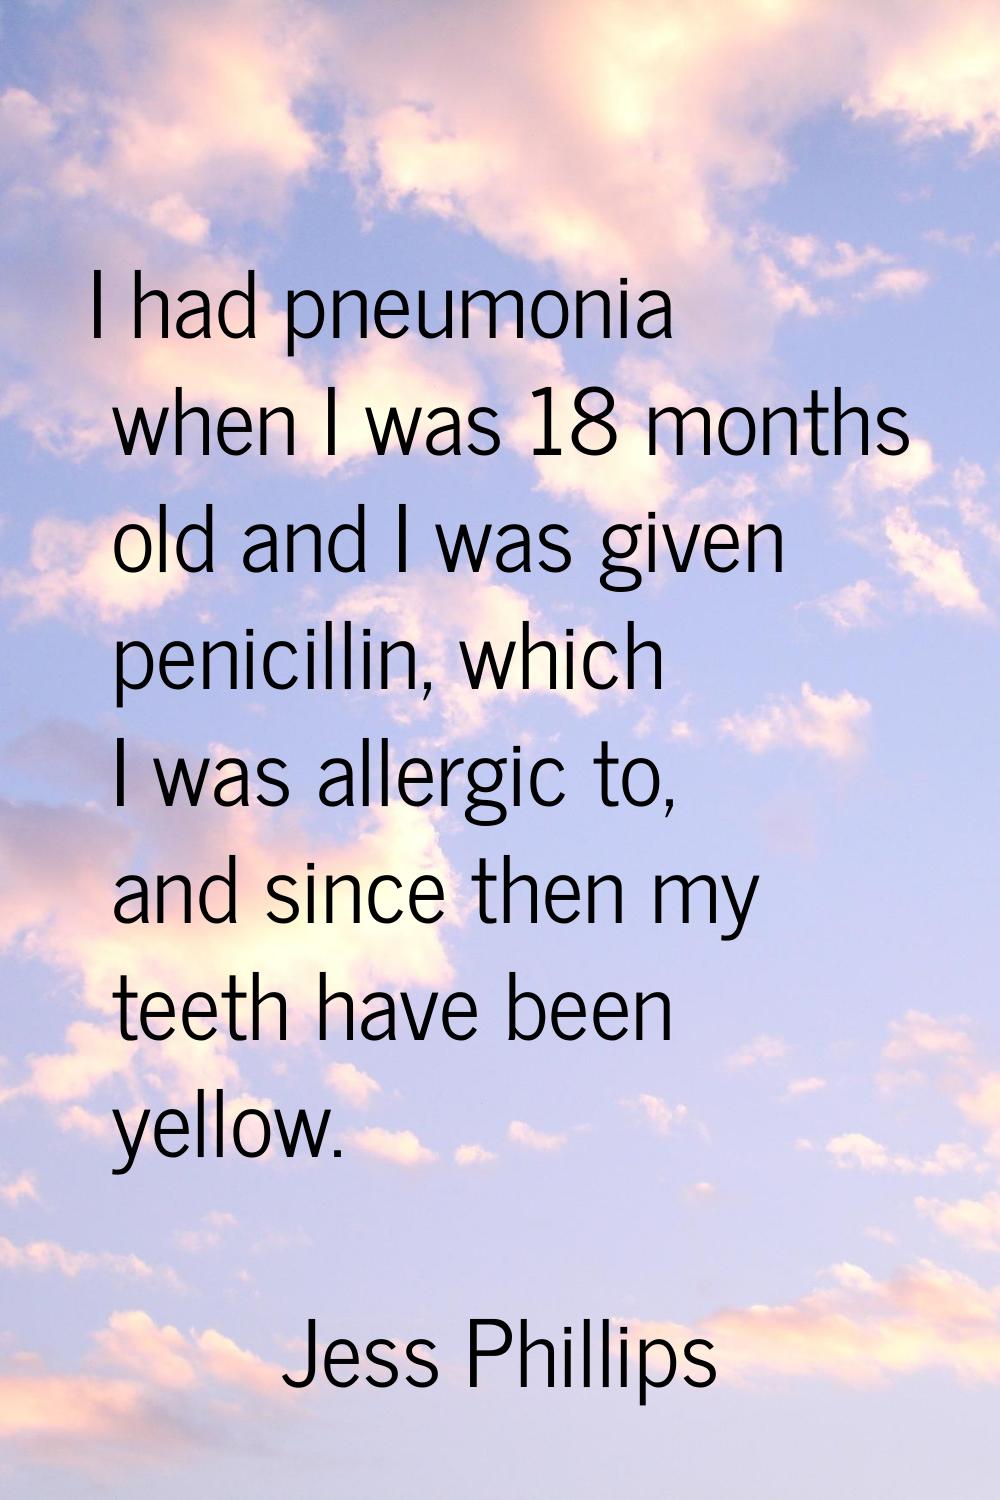 I had pneumonia when I was 18 months old and I was given penicillin, which I was allergic to, and s